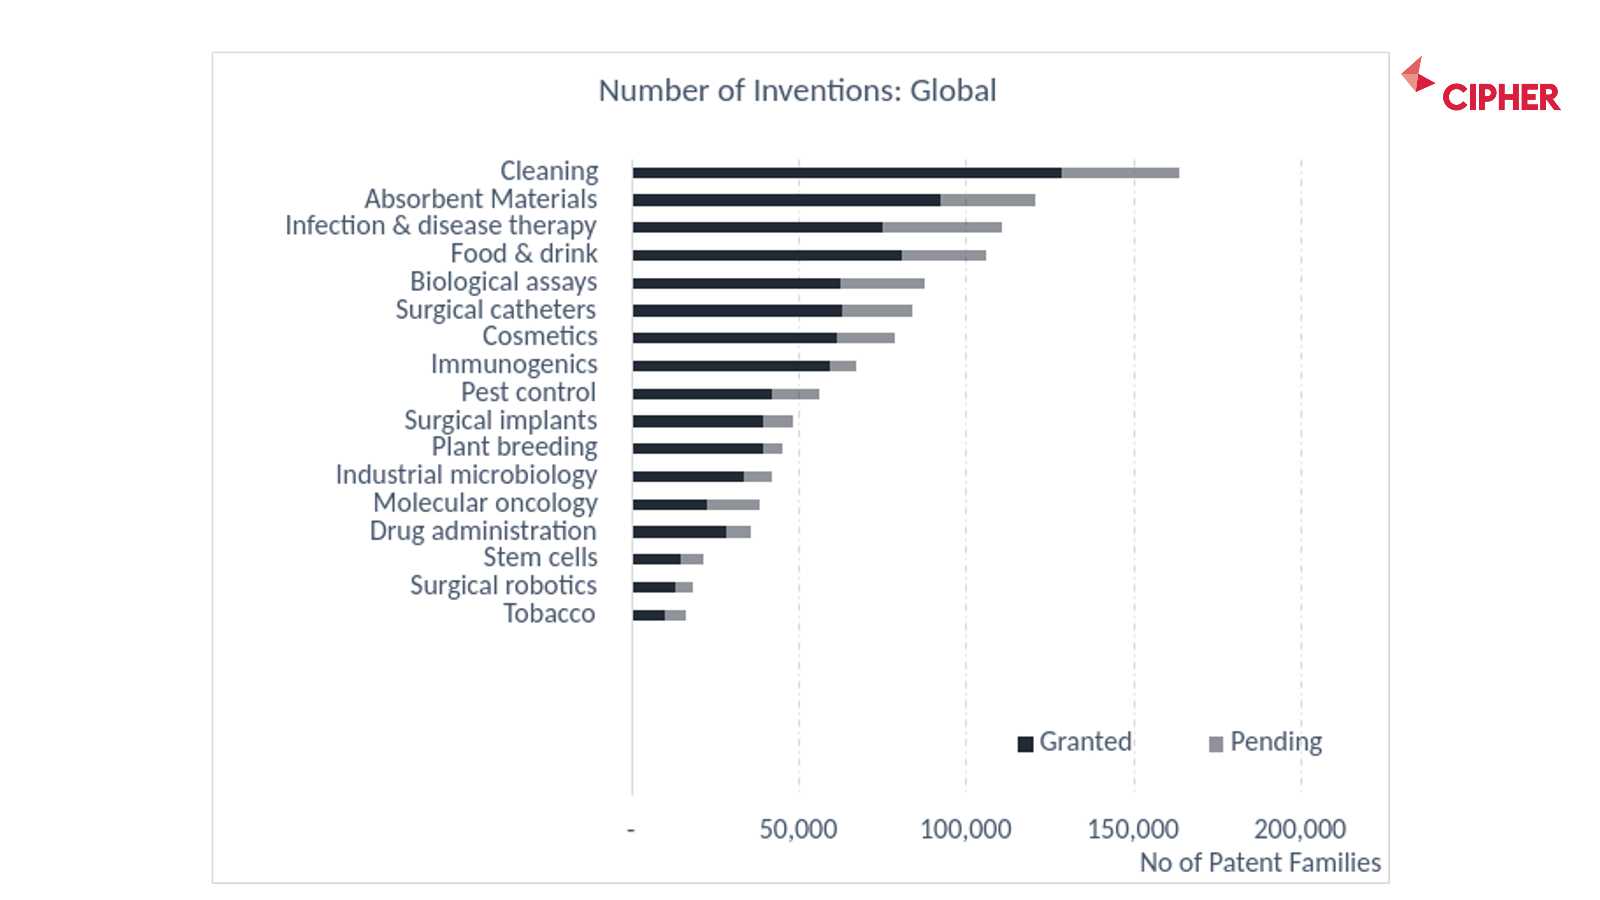 Number of inventions in the Life Sciences Category